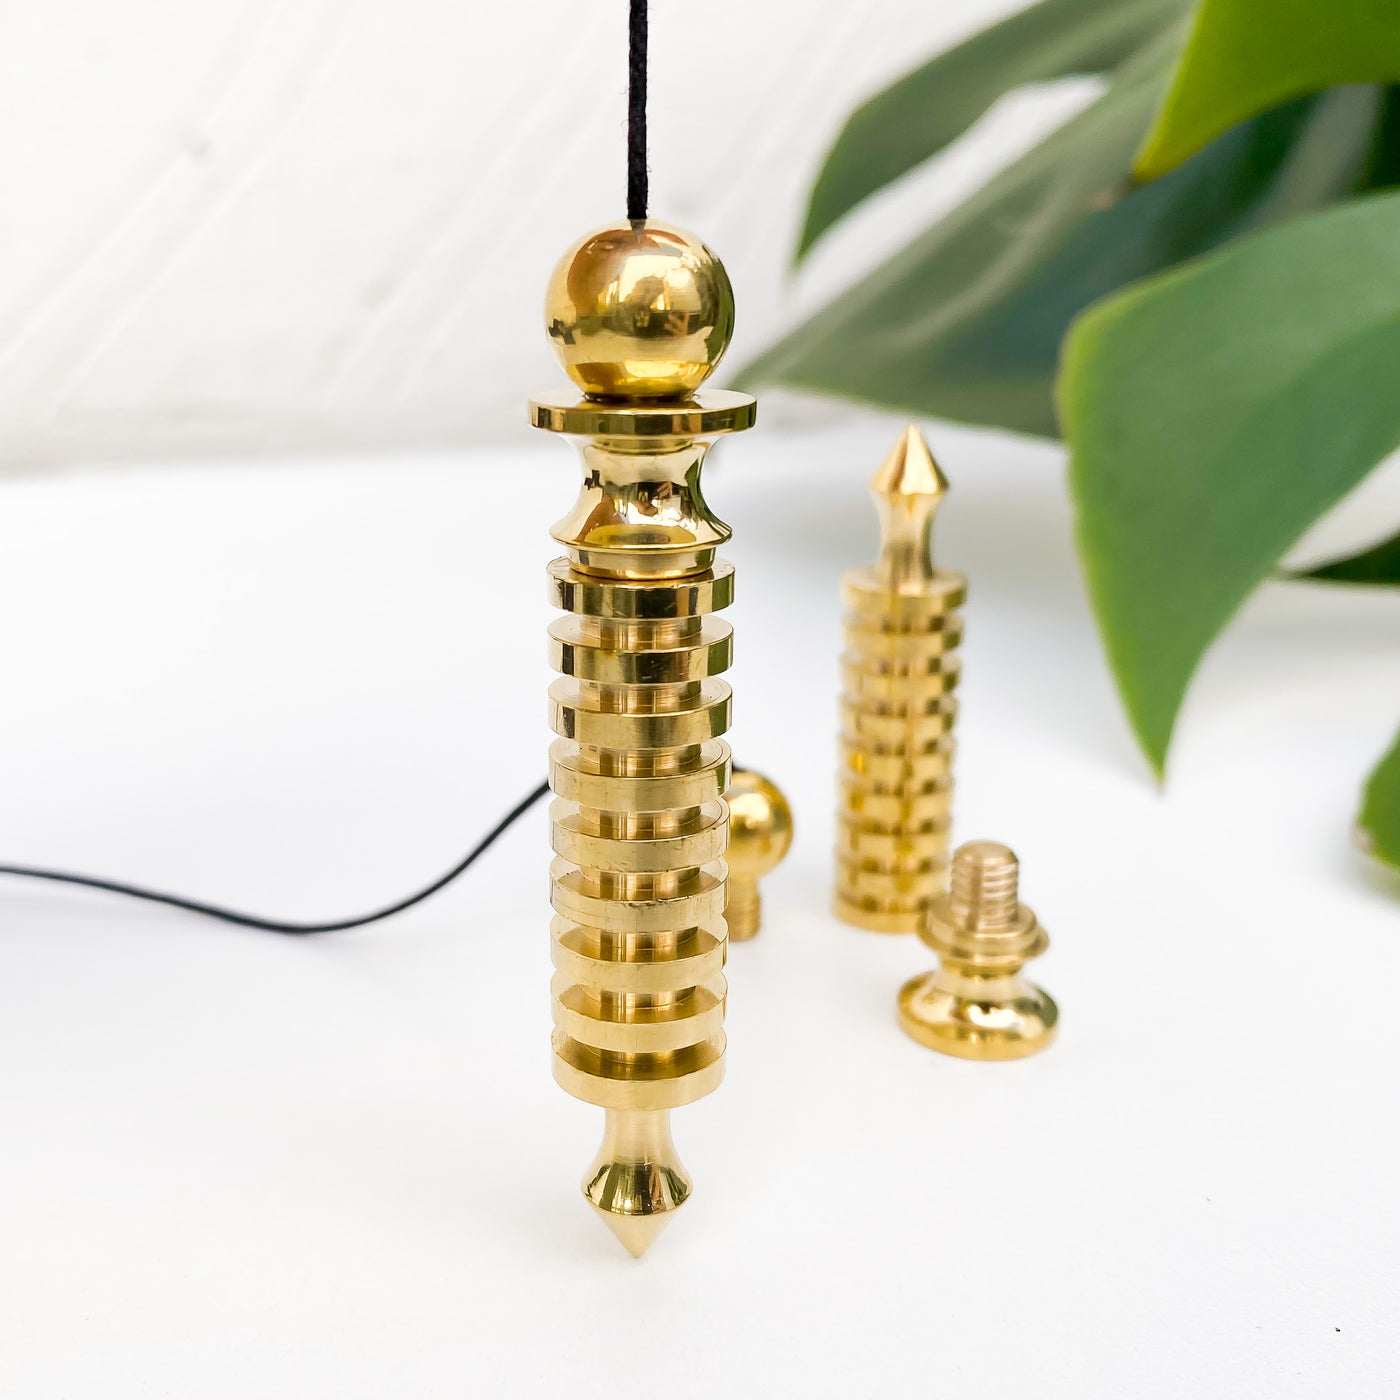 Gold Pendulum with Empty Space Inside